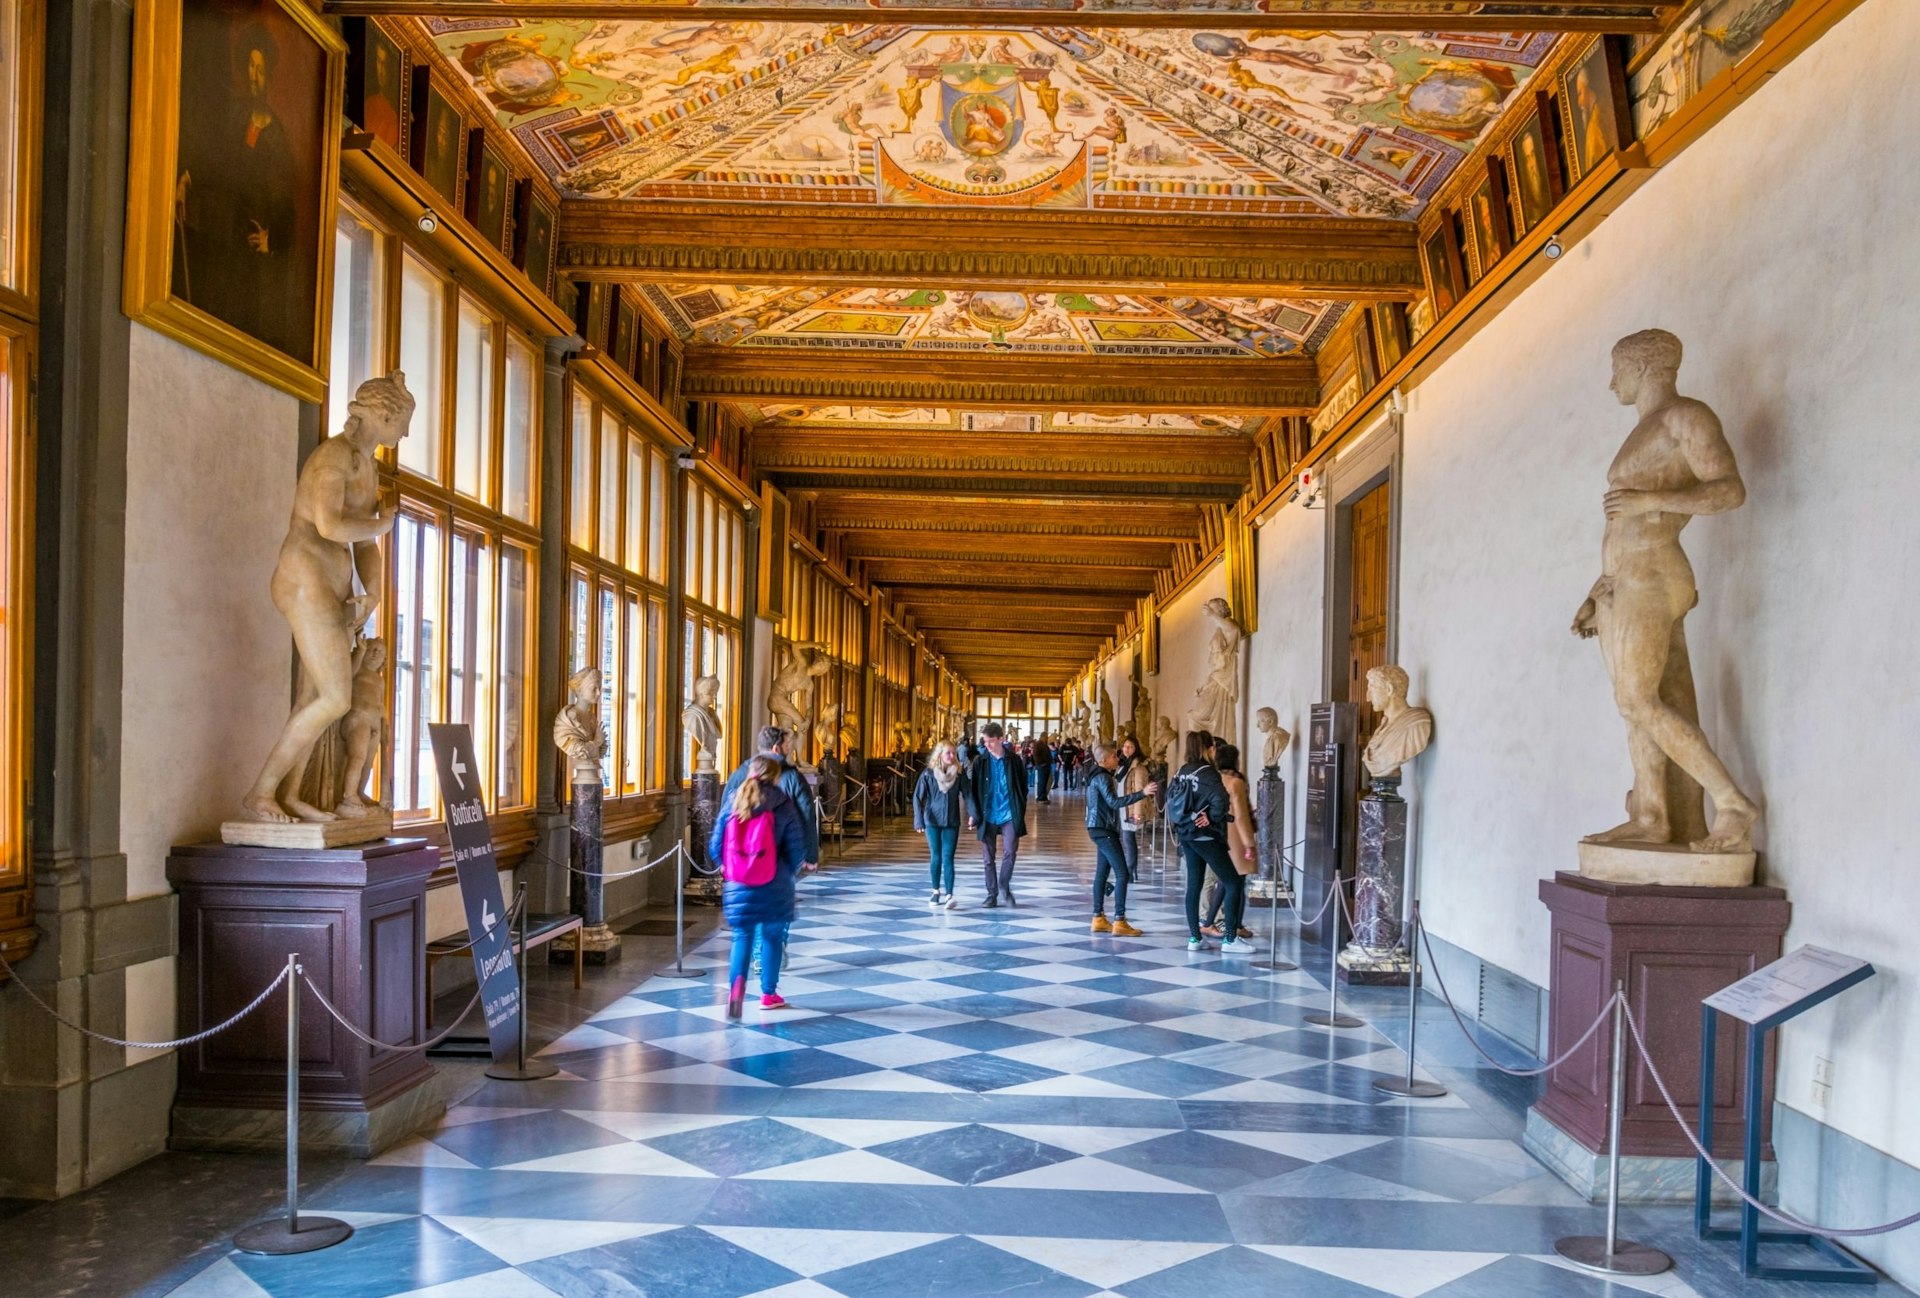 Detail of a corridor at the Uffizi Gallery in Florence